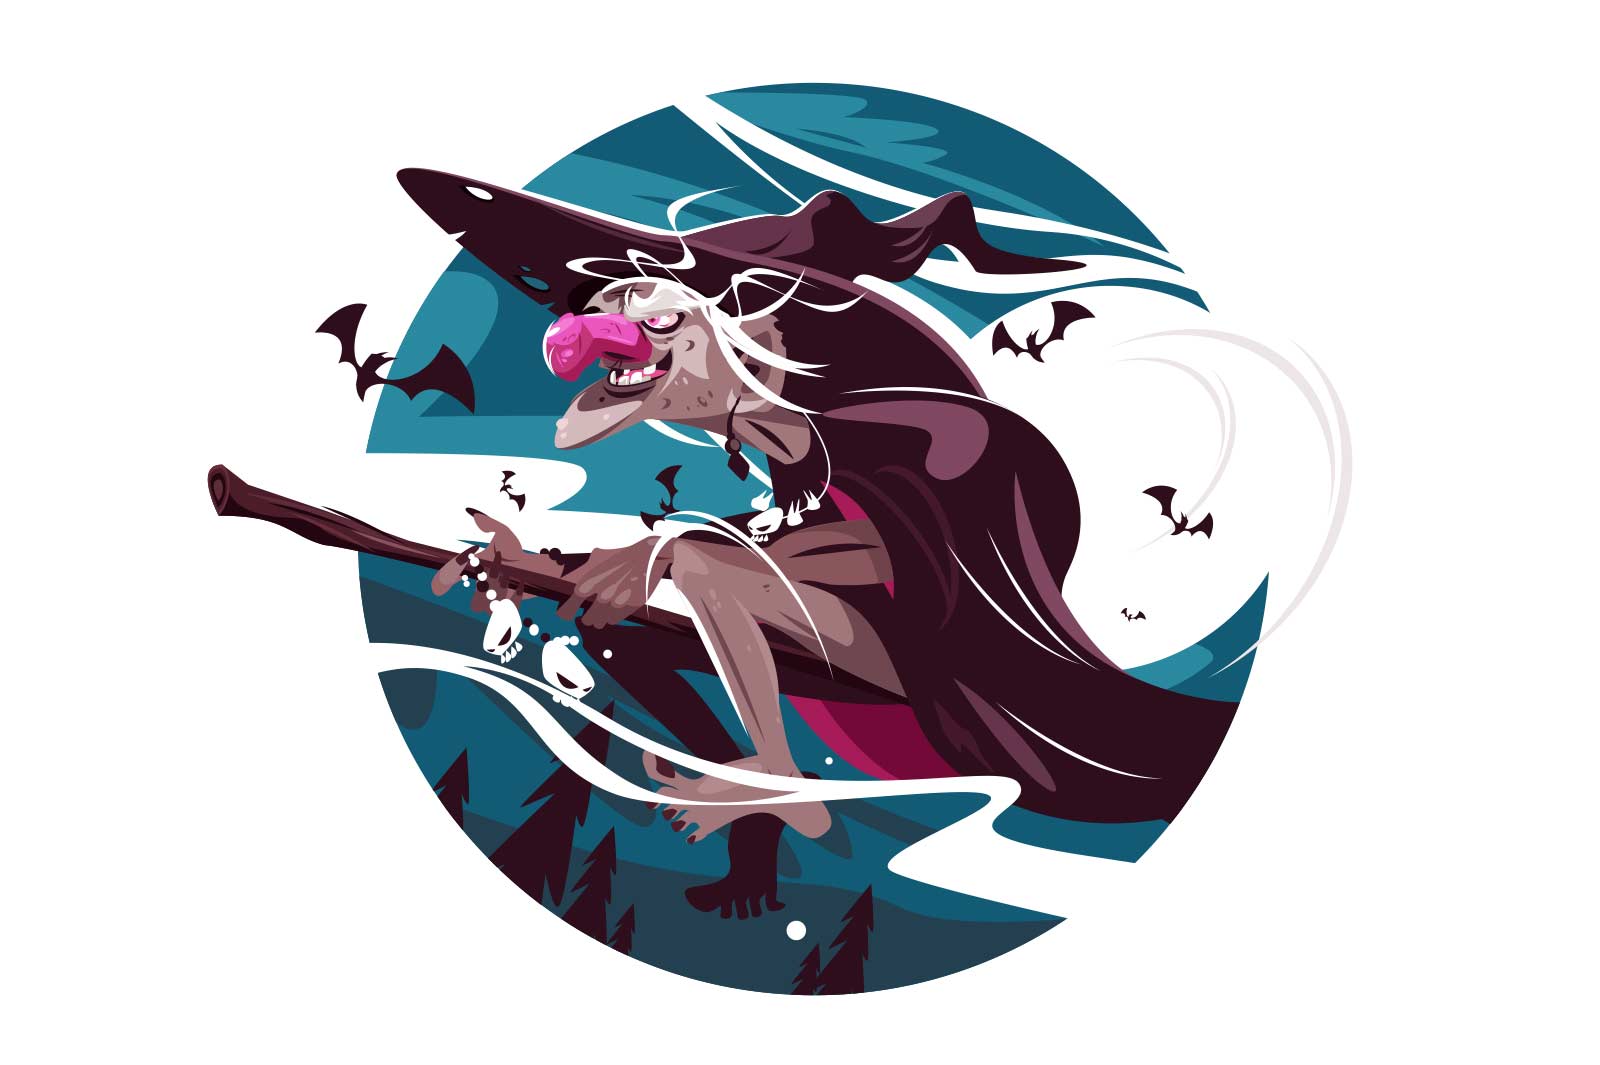 Scary old witch vector illustration. Witch flying on broomstick flat style. Moonlight and bats. Halloween and creepy character concept. Isolated on white background